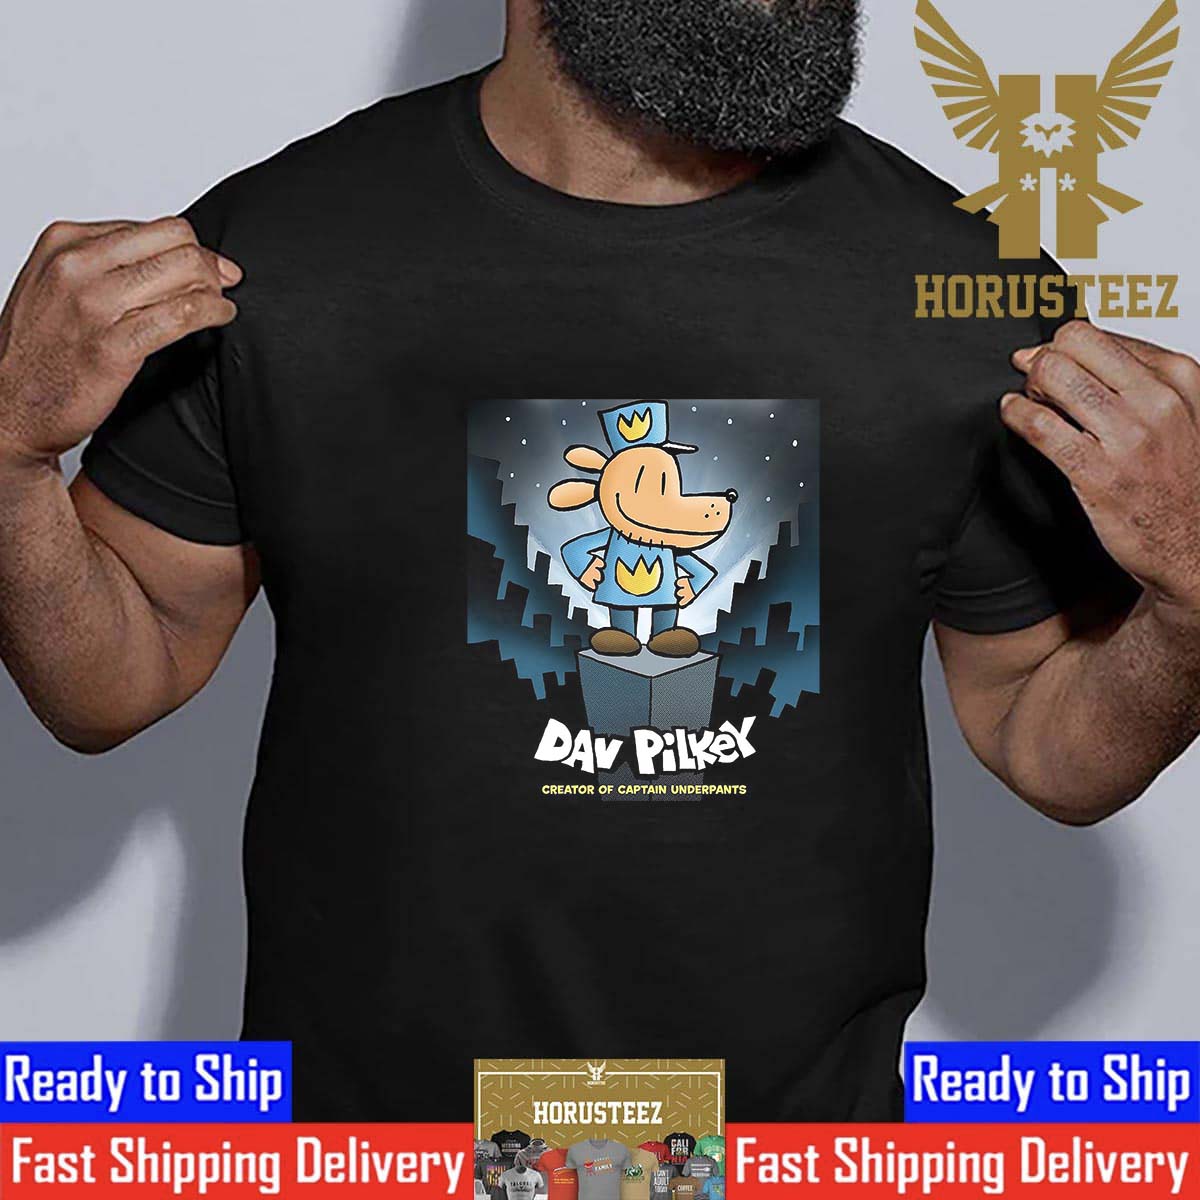 Dog Man Dav Pilkey Creator Of Captain Underpants Animated Movie Release On January 31th 2025 Classic T-Shirt